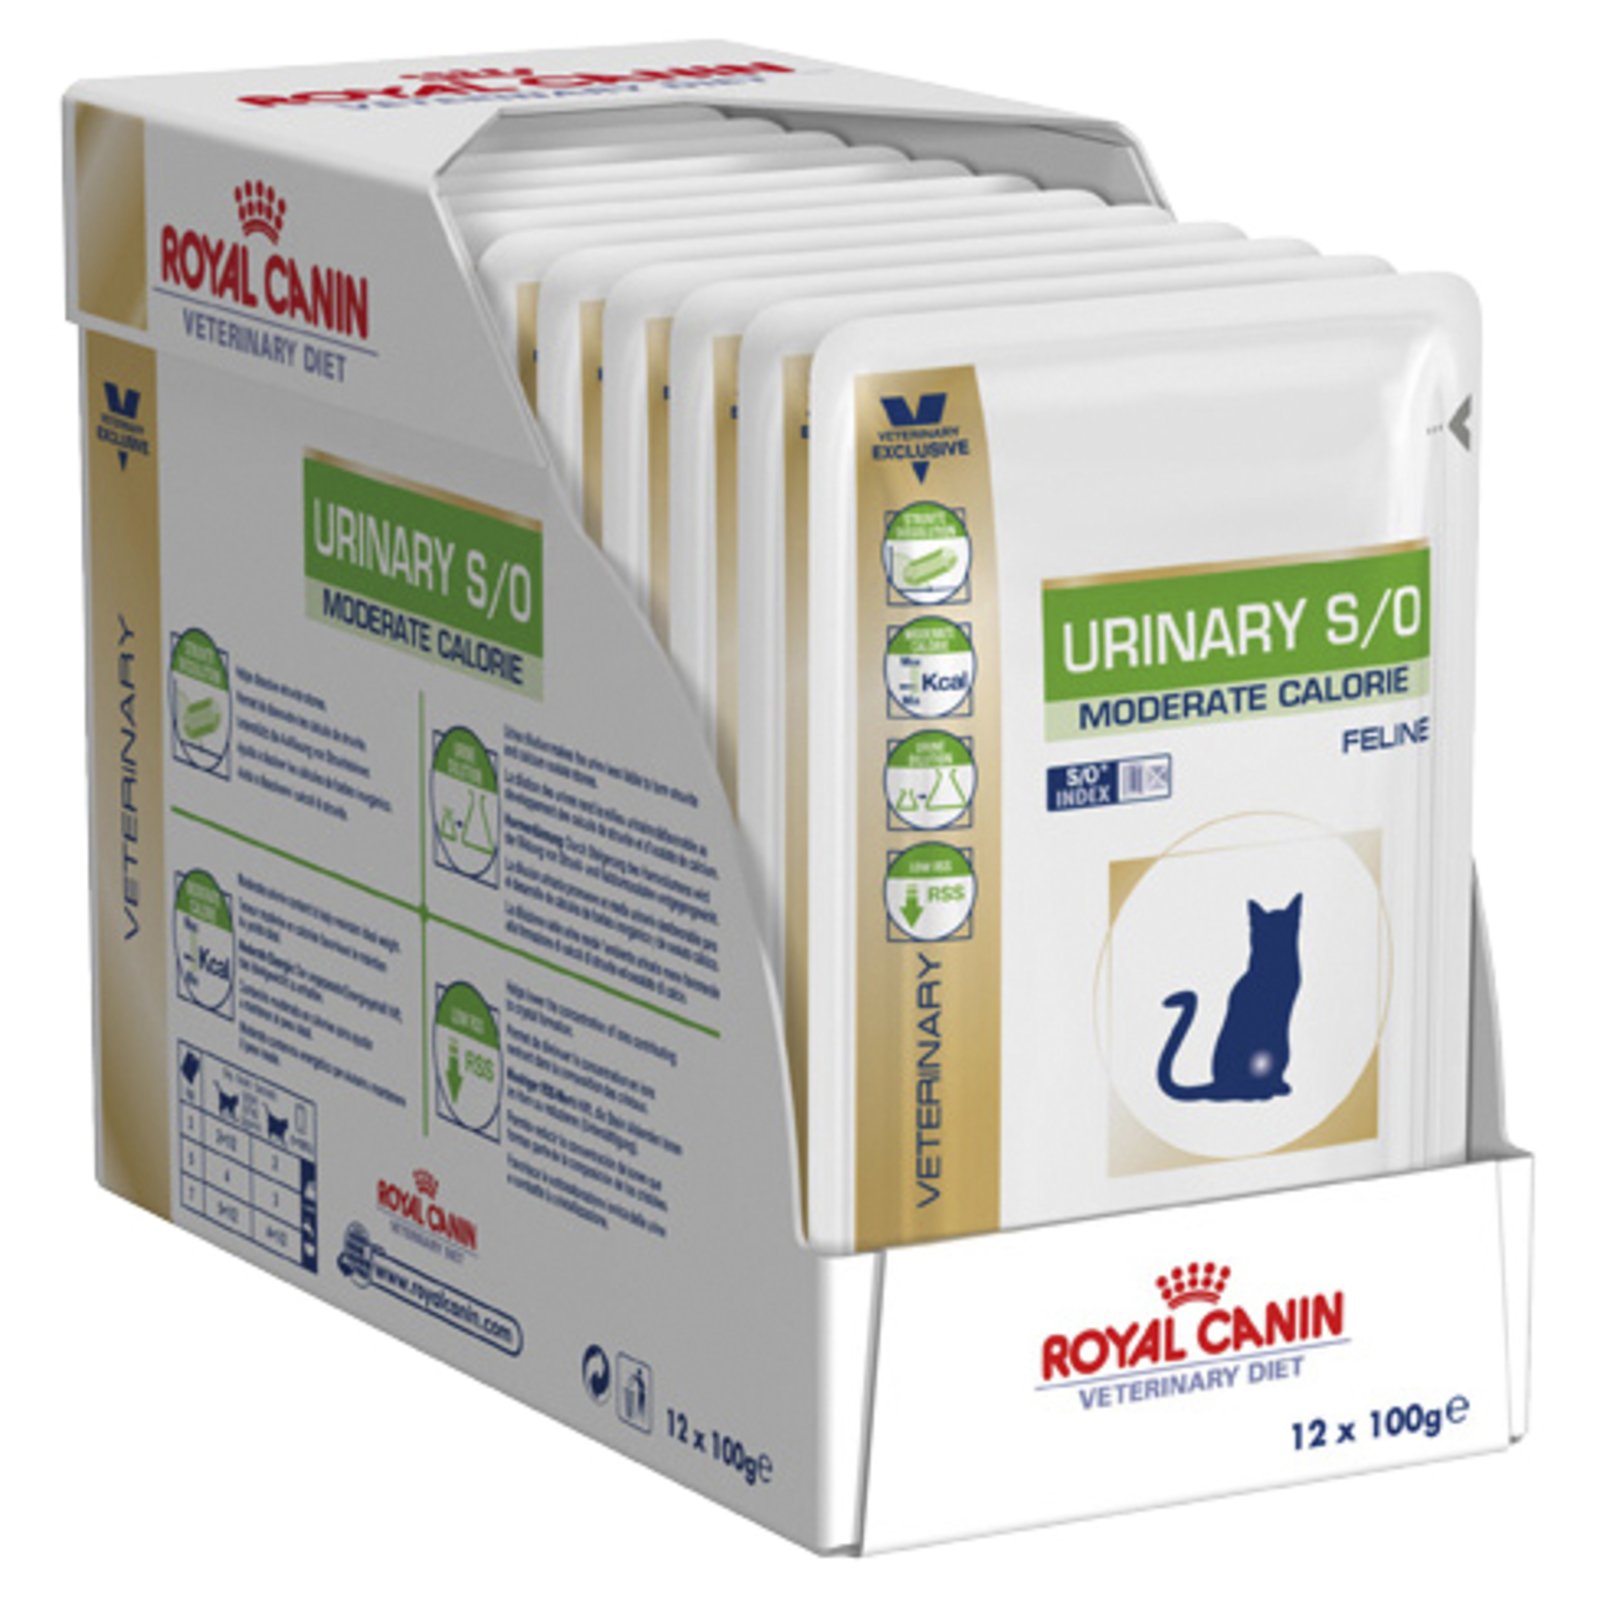 Royal Canin Feline Urinary Moderate Calorie Wet Cat Food